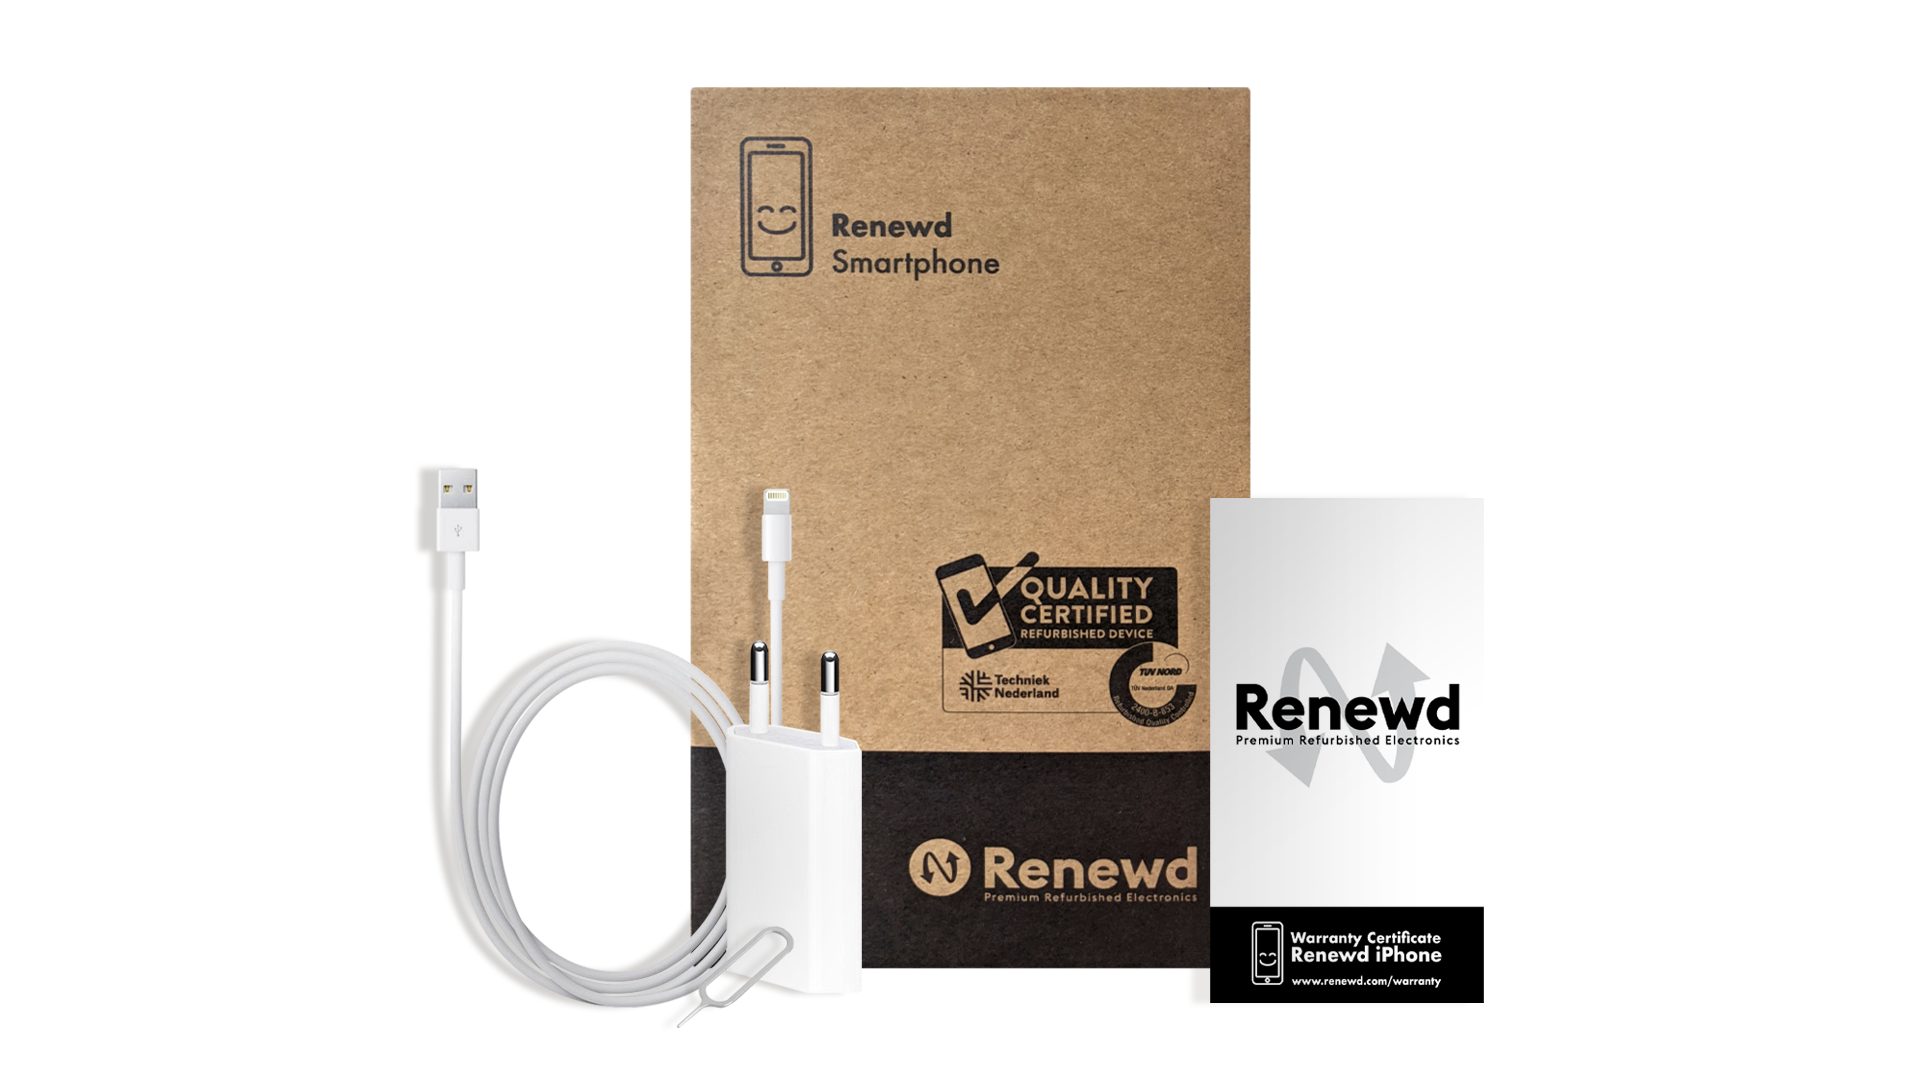 Renewd®-iPhone-Imagery-Package-01.png